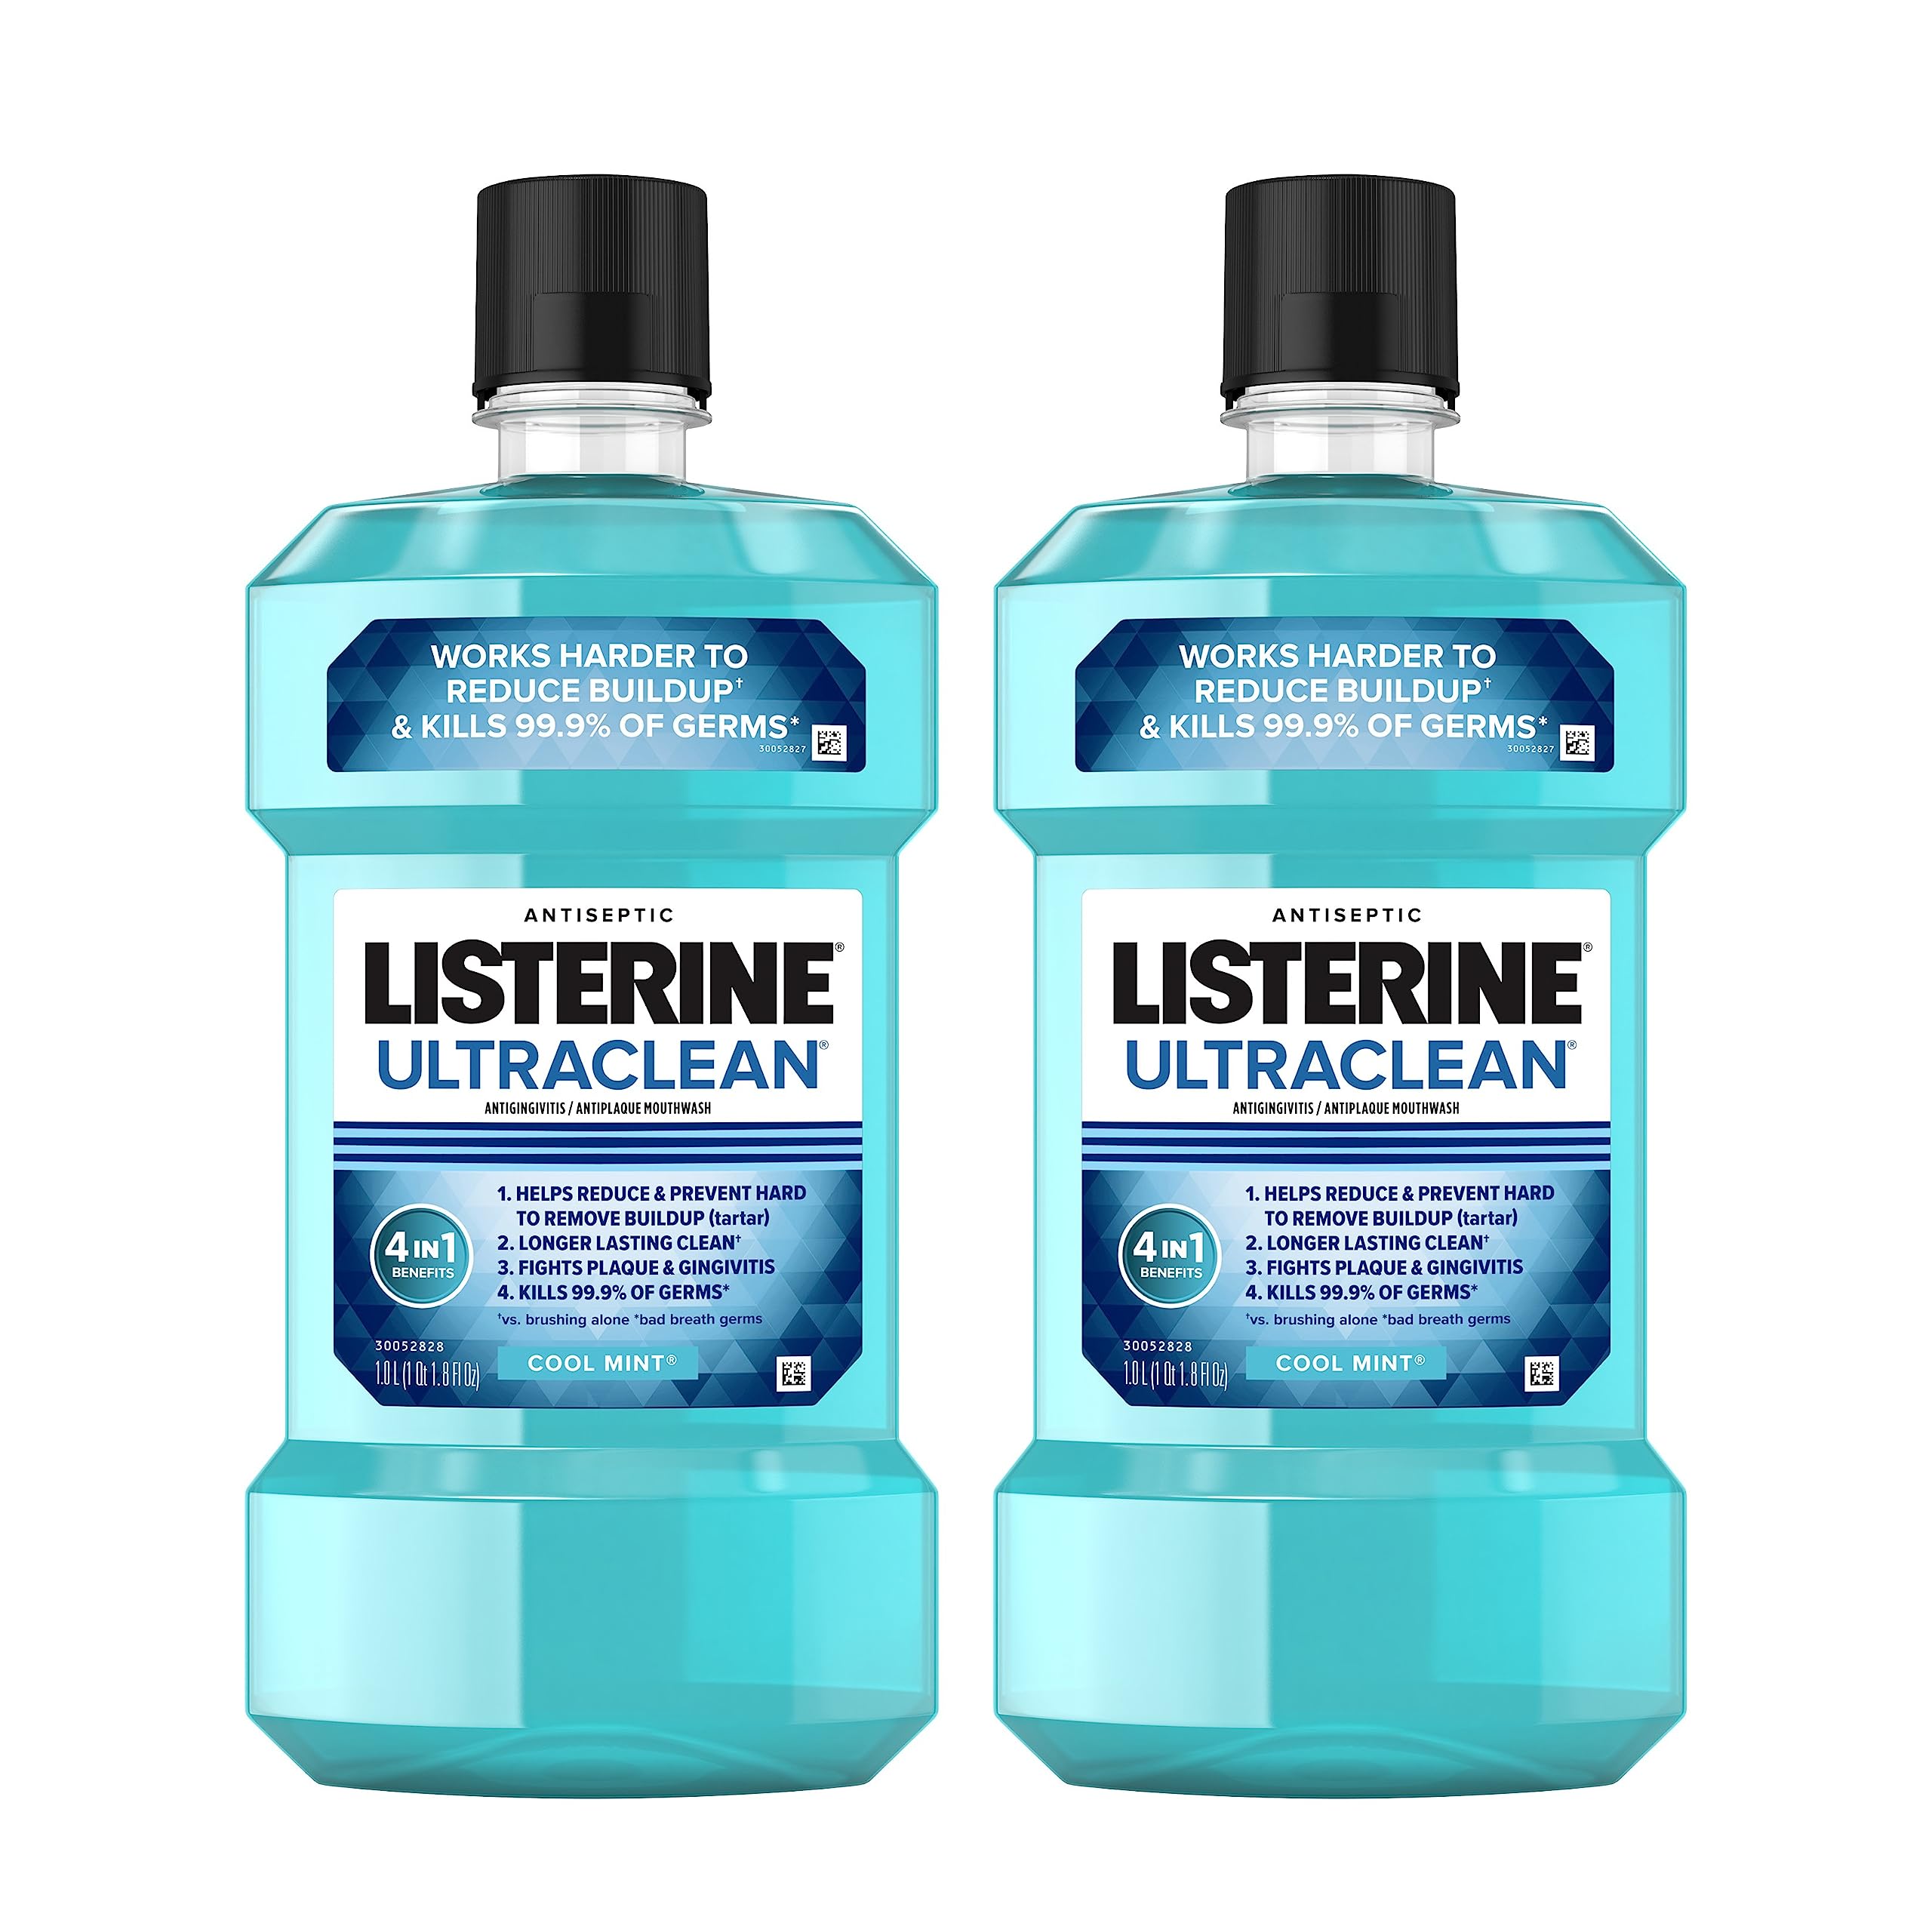 Listerine Ultraclean Oral Care Antiseptic Mouthwash, Everfresh Technology to Help Fight Bad Breath, Gingivitis, Plaque & Tartar, ADA-Accepted Oral Rinse, Cool Mint, 1 L, Pack of 2